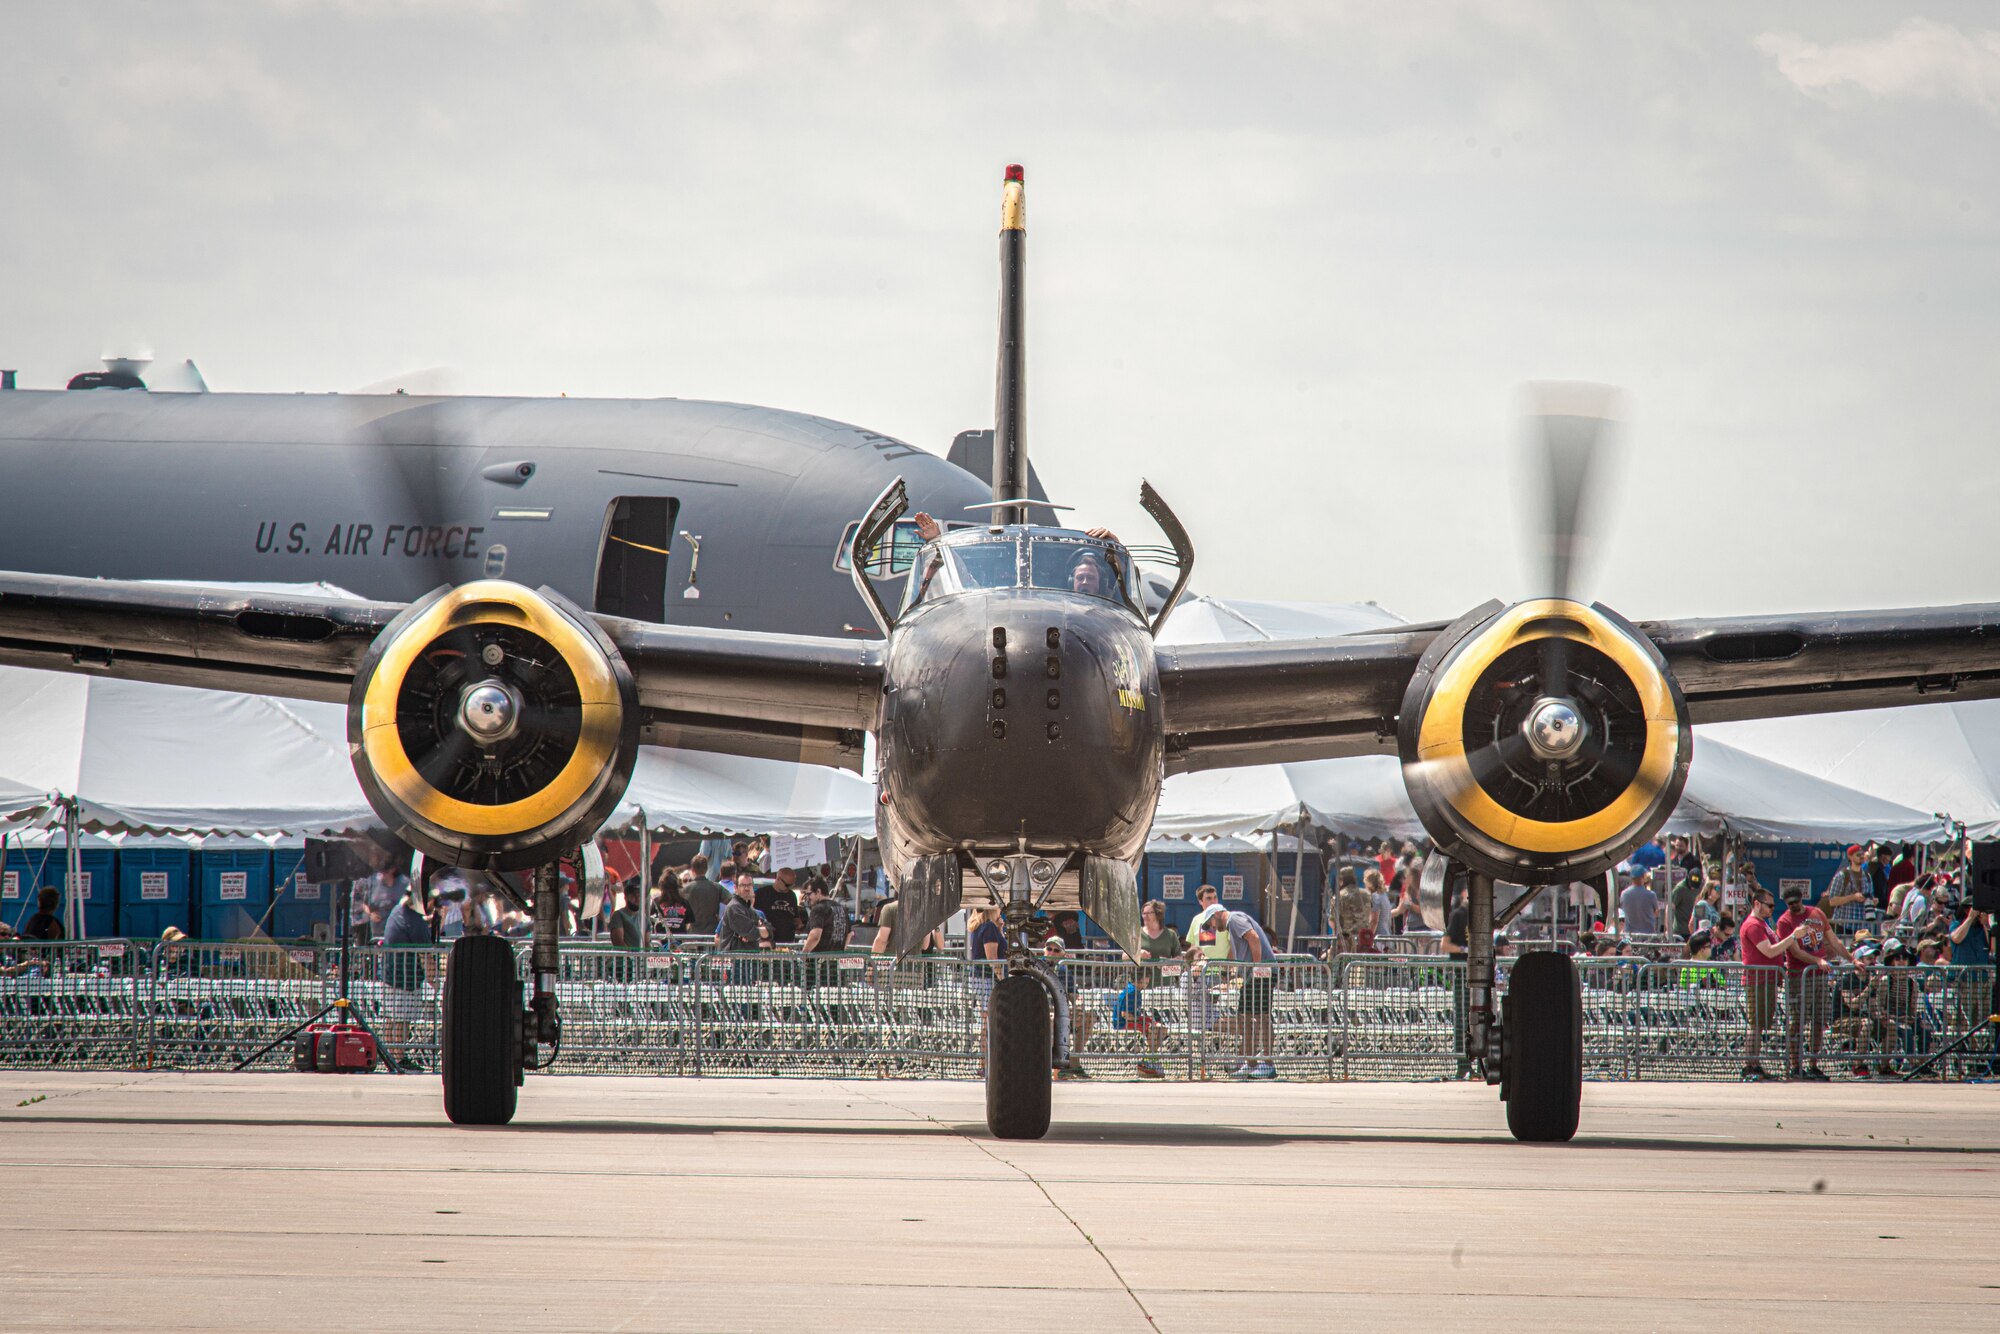 An A-26 Invader aircraft taxis after a performance during the Speed of Sound Airshow at Rosecrans Memorial Airport in St. Joseph, Missouri, May 2, 2020. The air show was hosted by the 139th Airlift Wing, and city of St. Joseph to thank the community for their support. The air show committee estimated around 30,000 people attended during the weekend performances in which the United States Air Force Thunderbirds Air Demonstration Squadron were featured. (U.S. Air National Guard photo by Tech. Sgt. Patrick Evenson)